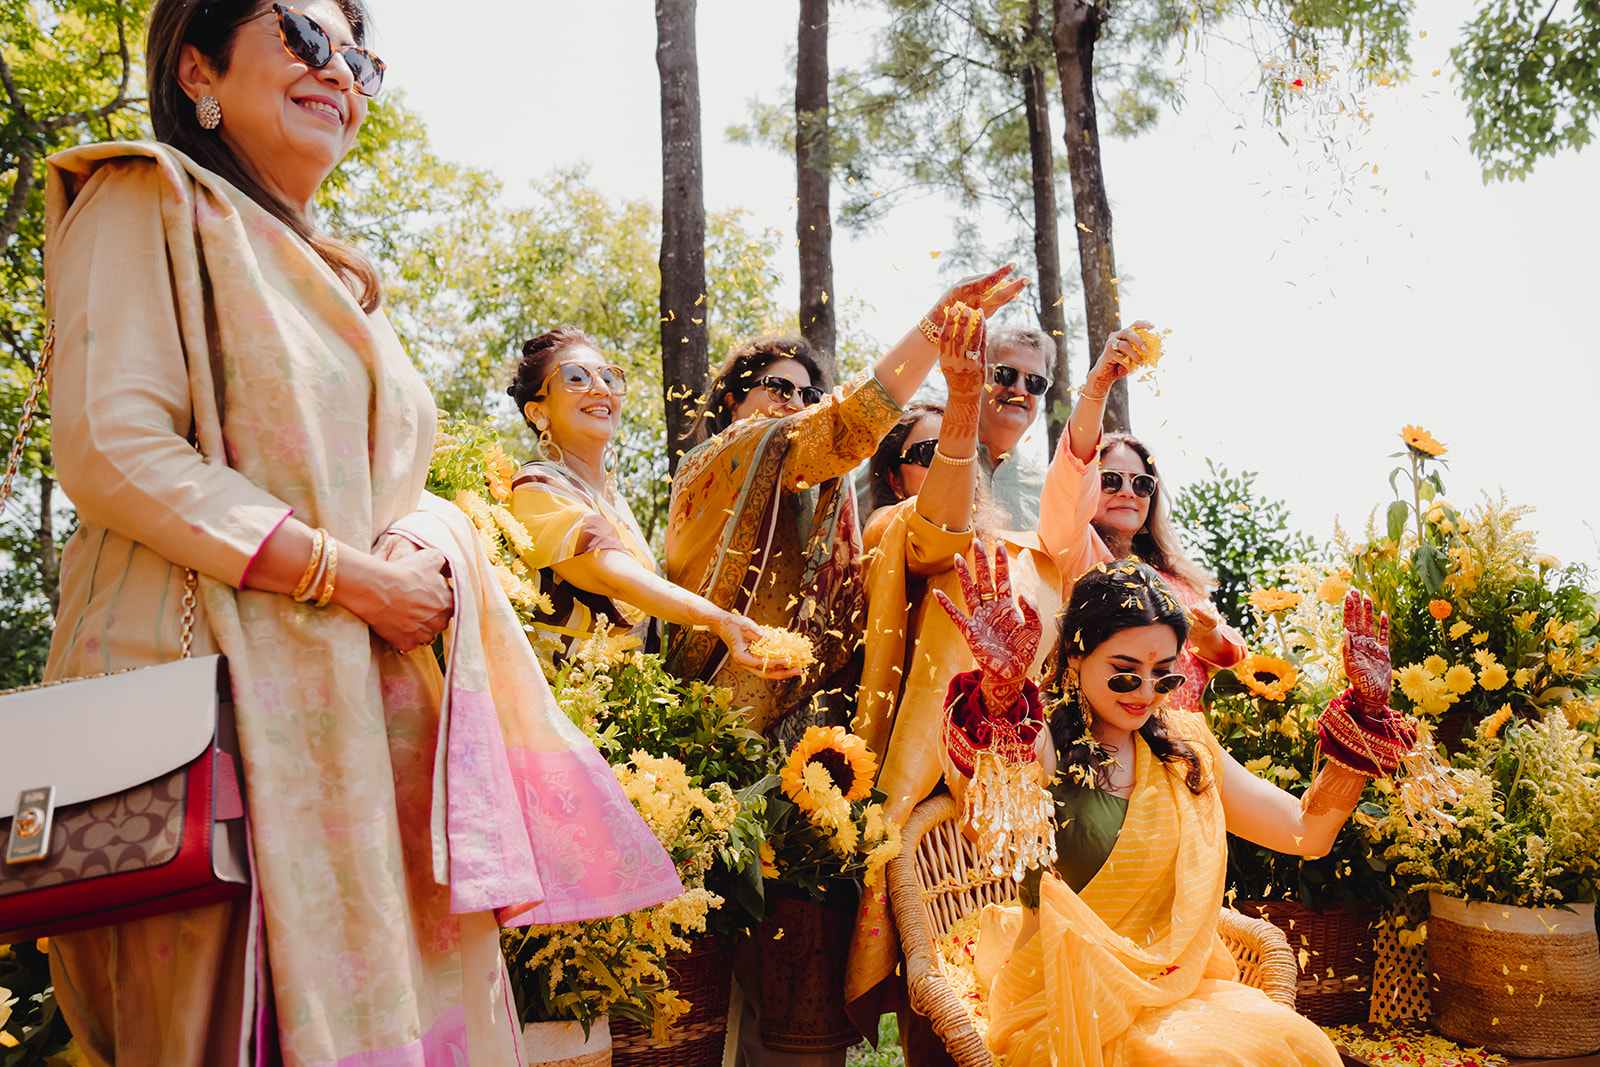 Haldi happiness: Bride immersed in joy as she enjoys the ceremonial festivities